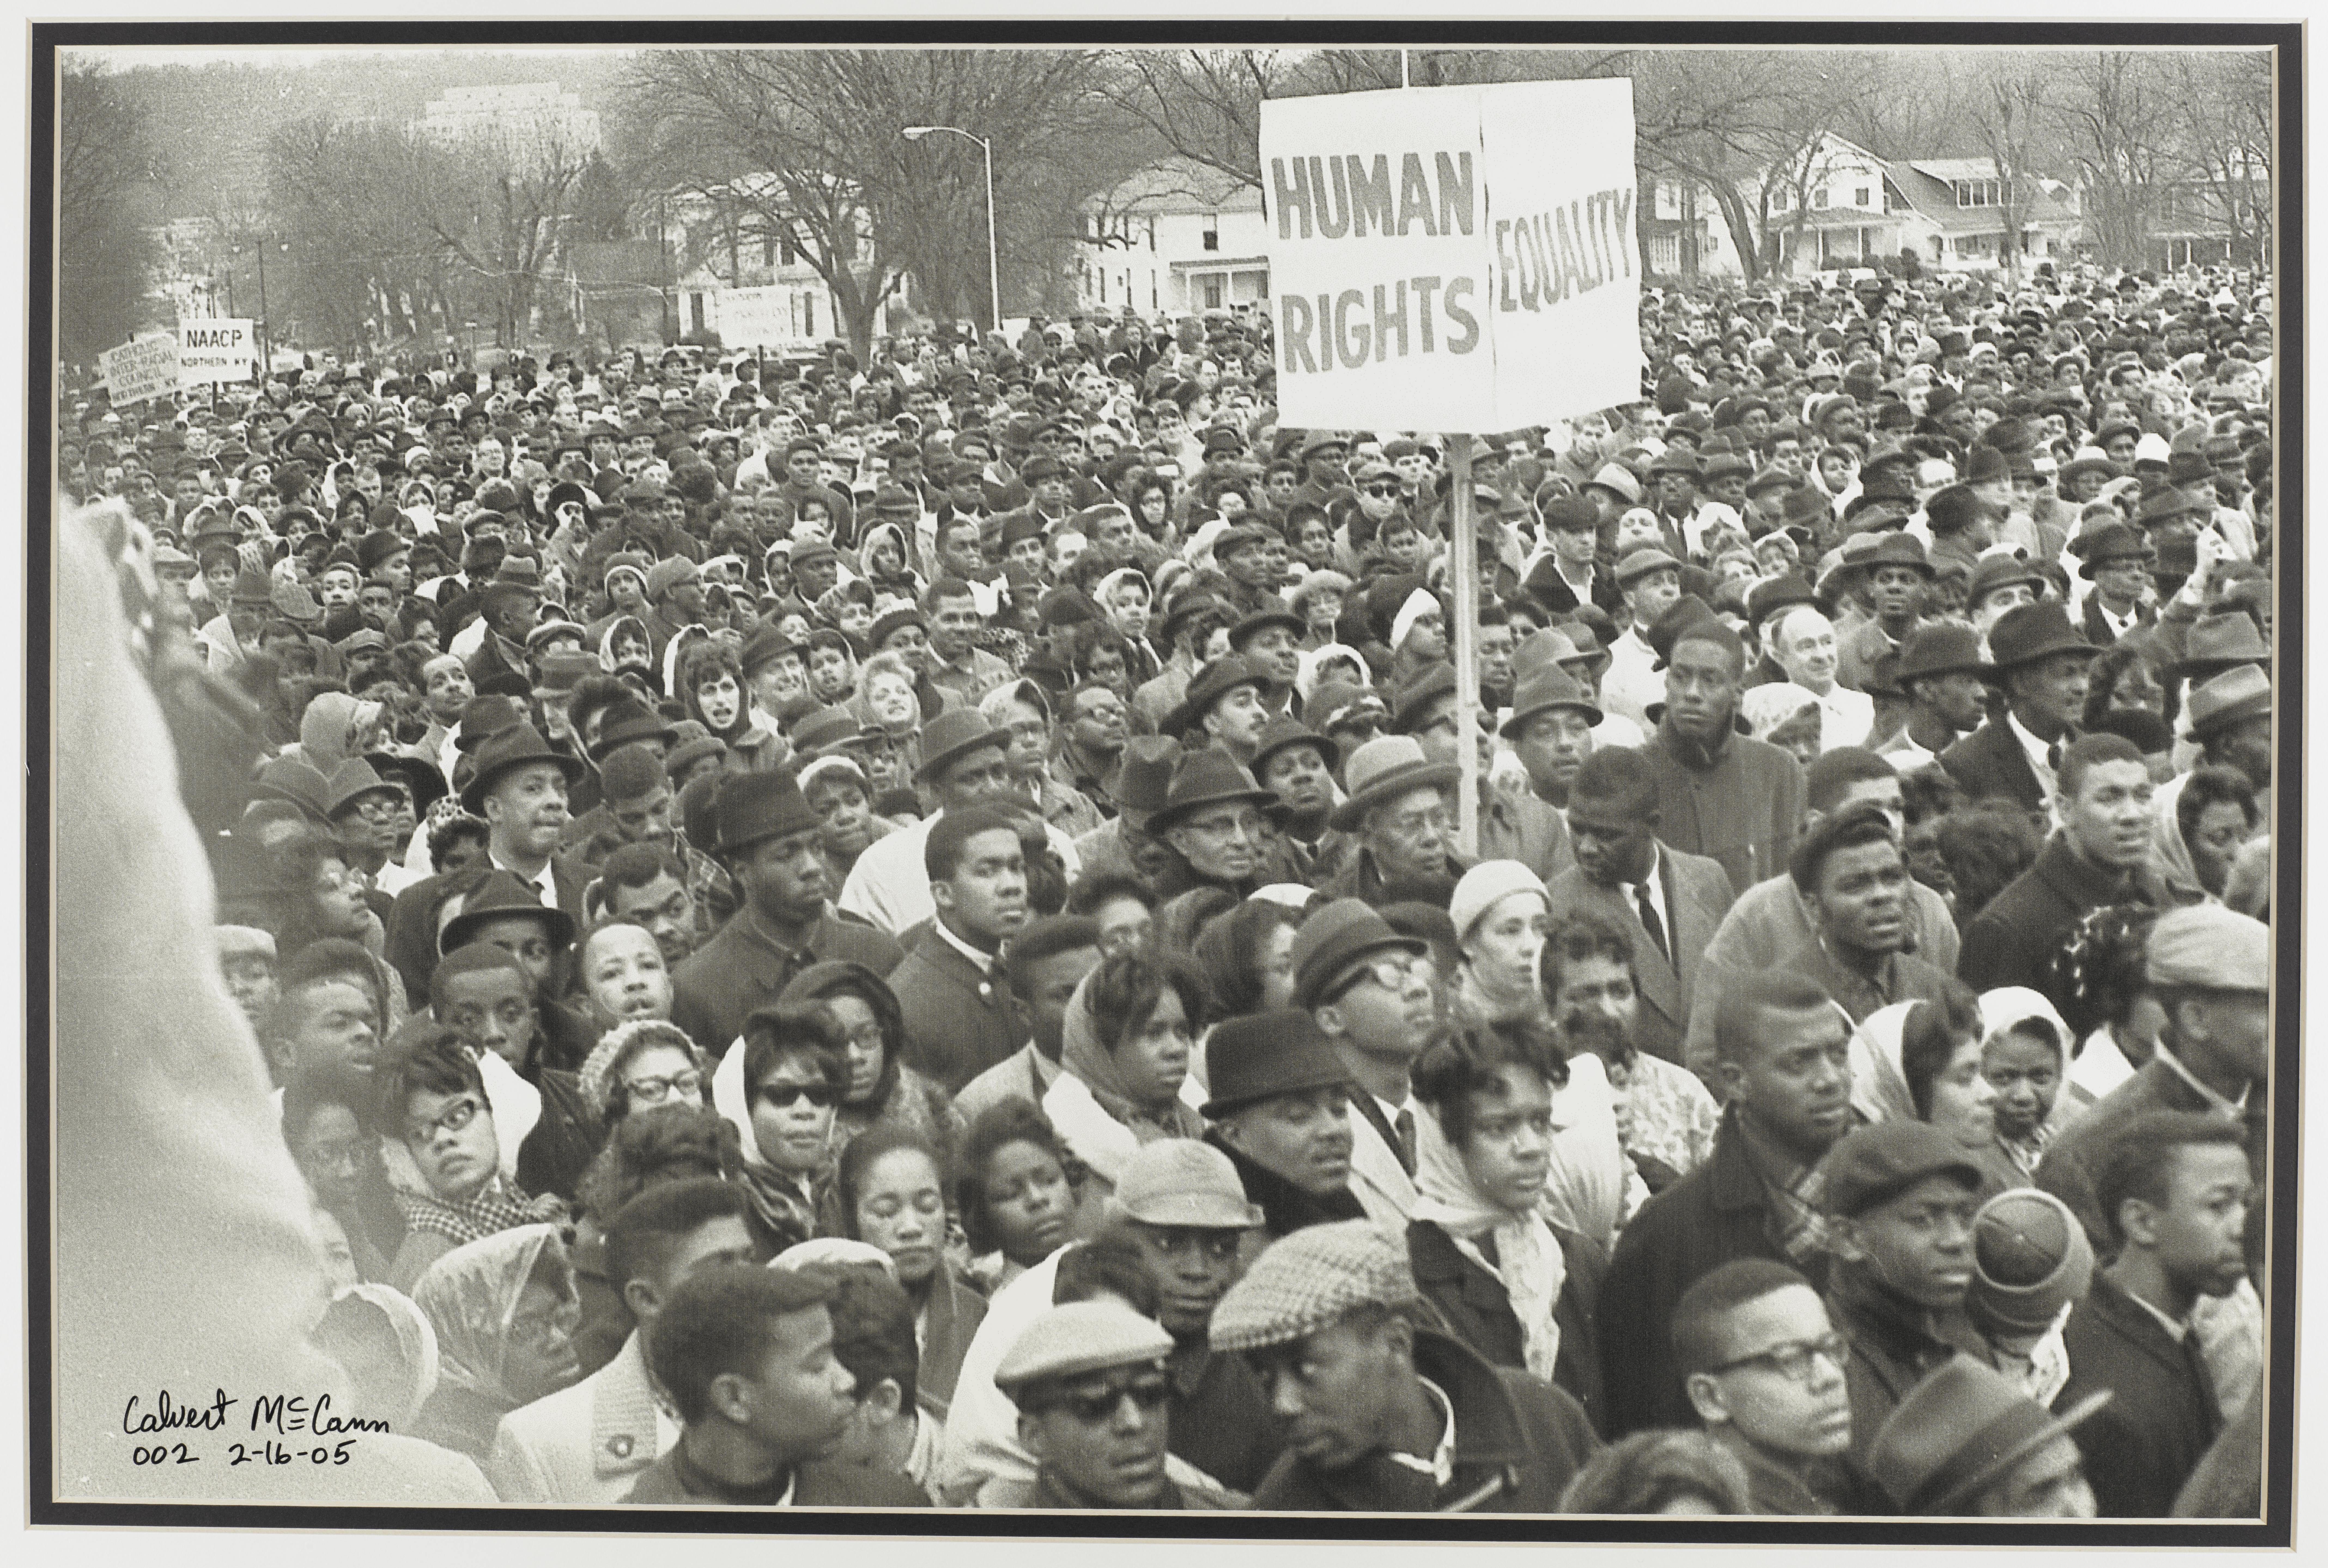 1964 Civil Rights March on Frankfort, Kentucky